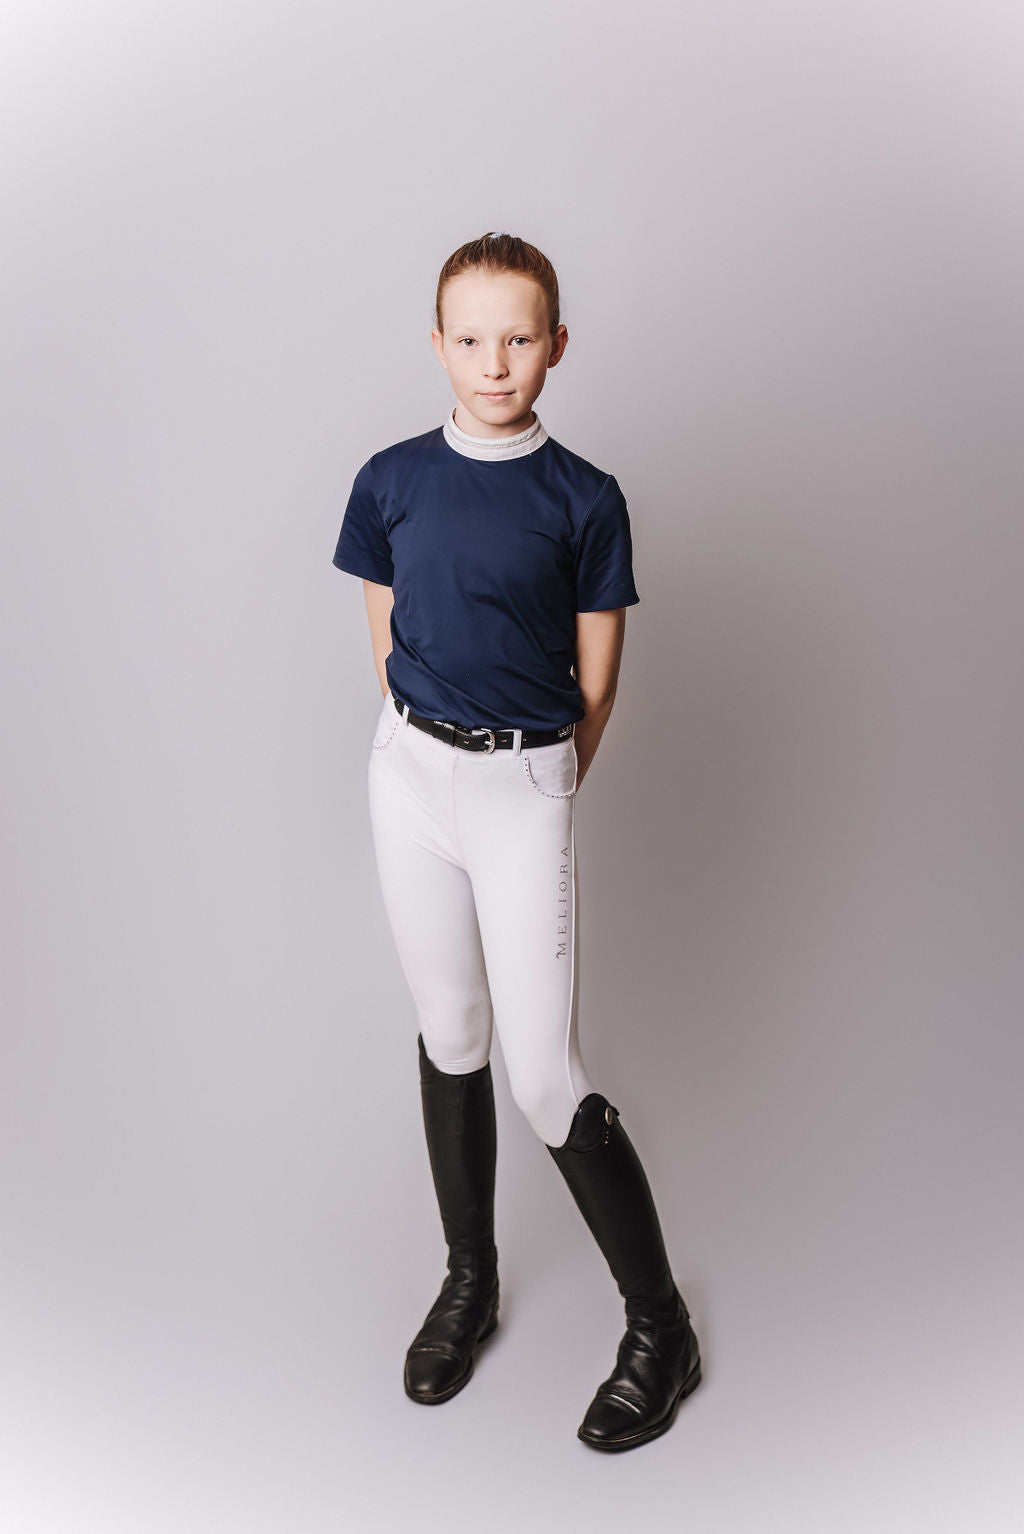 White Competition Breeches by Meliora Equestrian perfect for younger riders - photo of Breeches